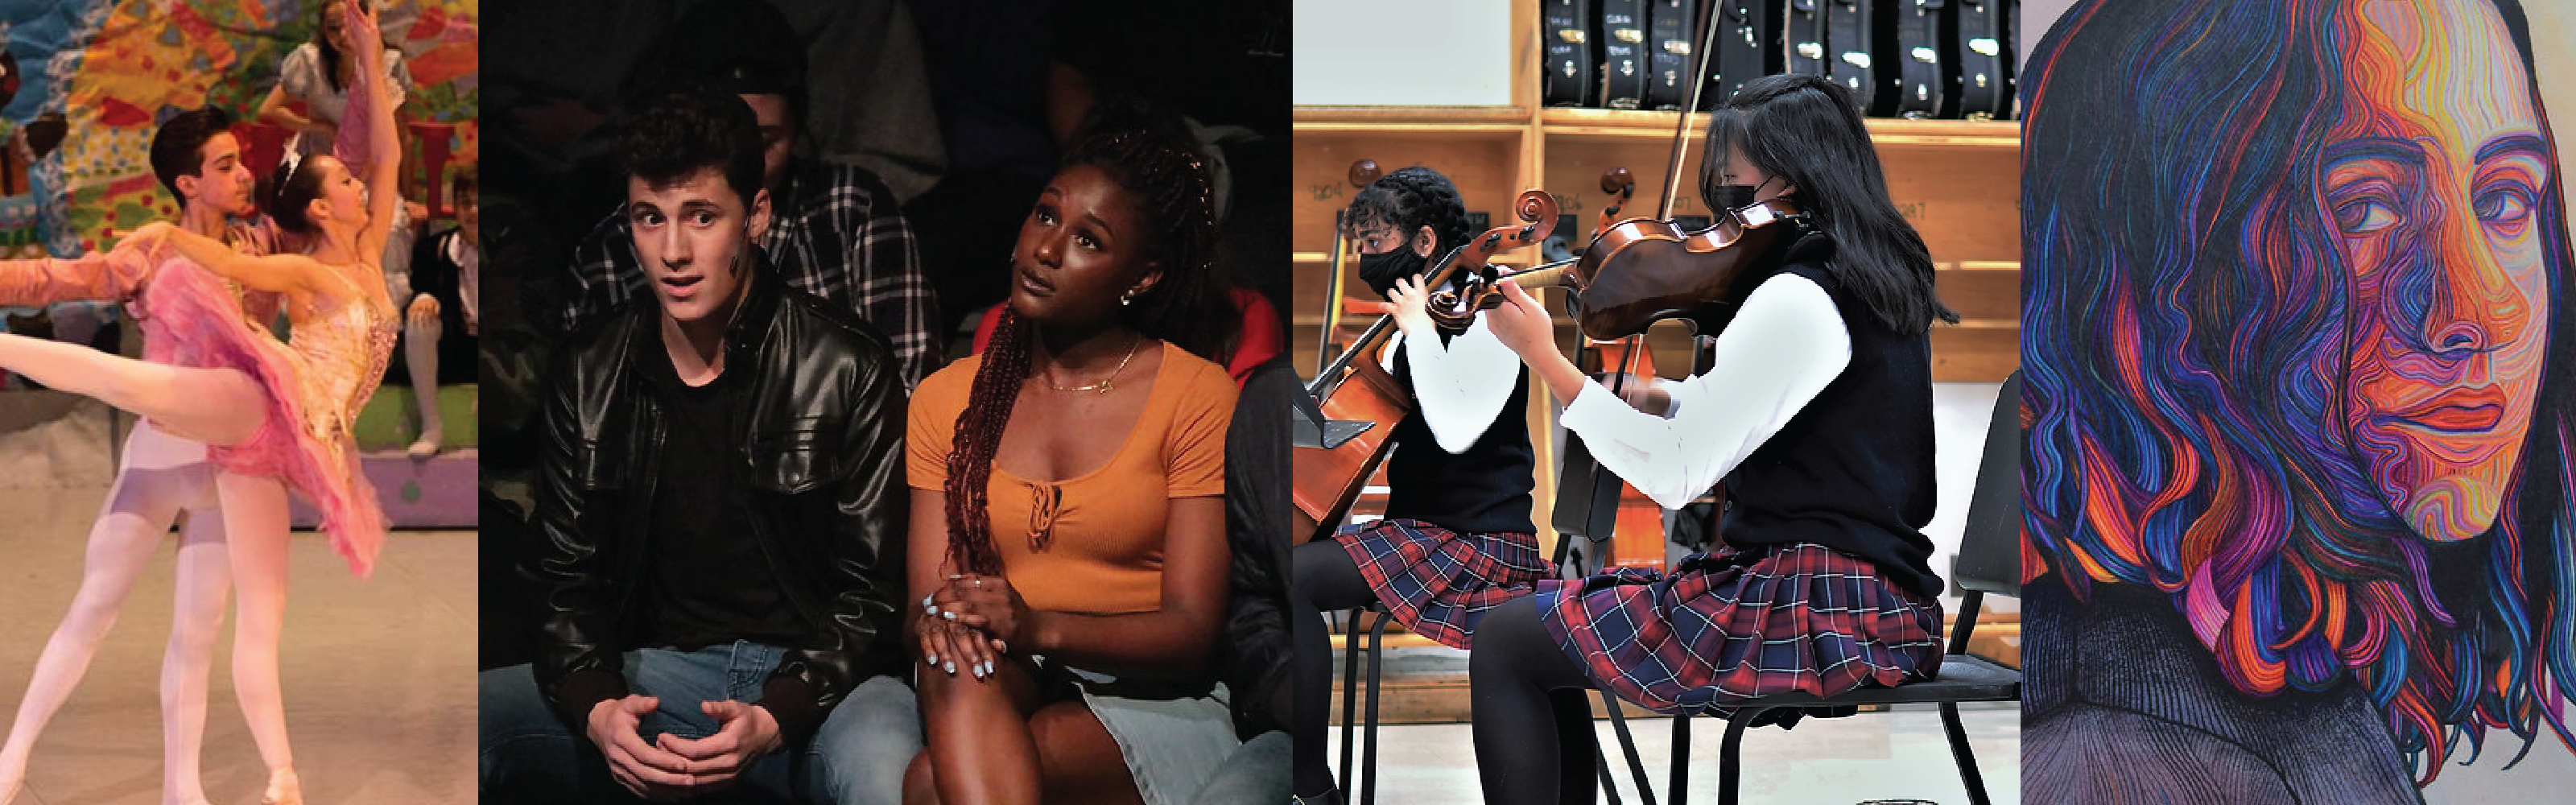 First image consists of 2 students in a dance show. Second image is 2 students in a drama play. Third  image consists of 2 students playing strings instrument.  Forth image is a portrait of a  person. 